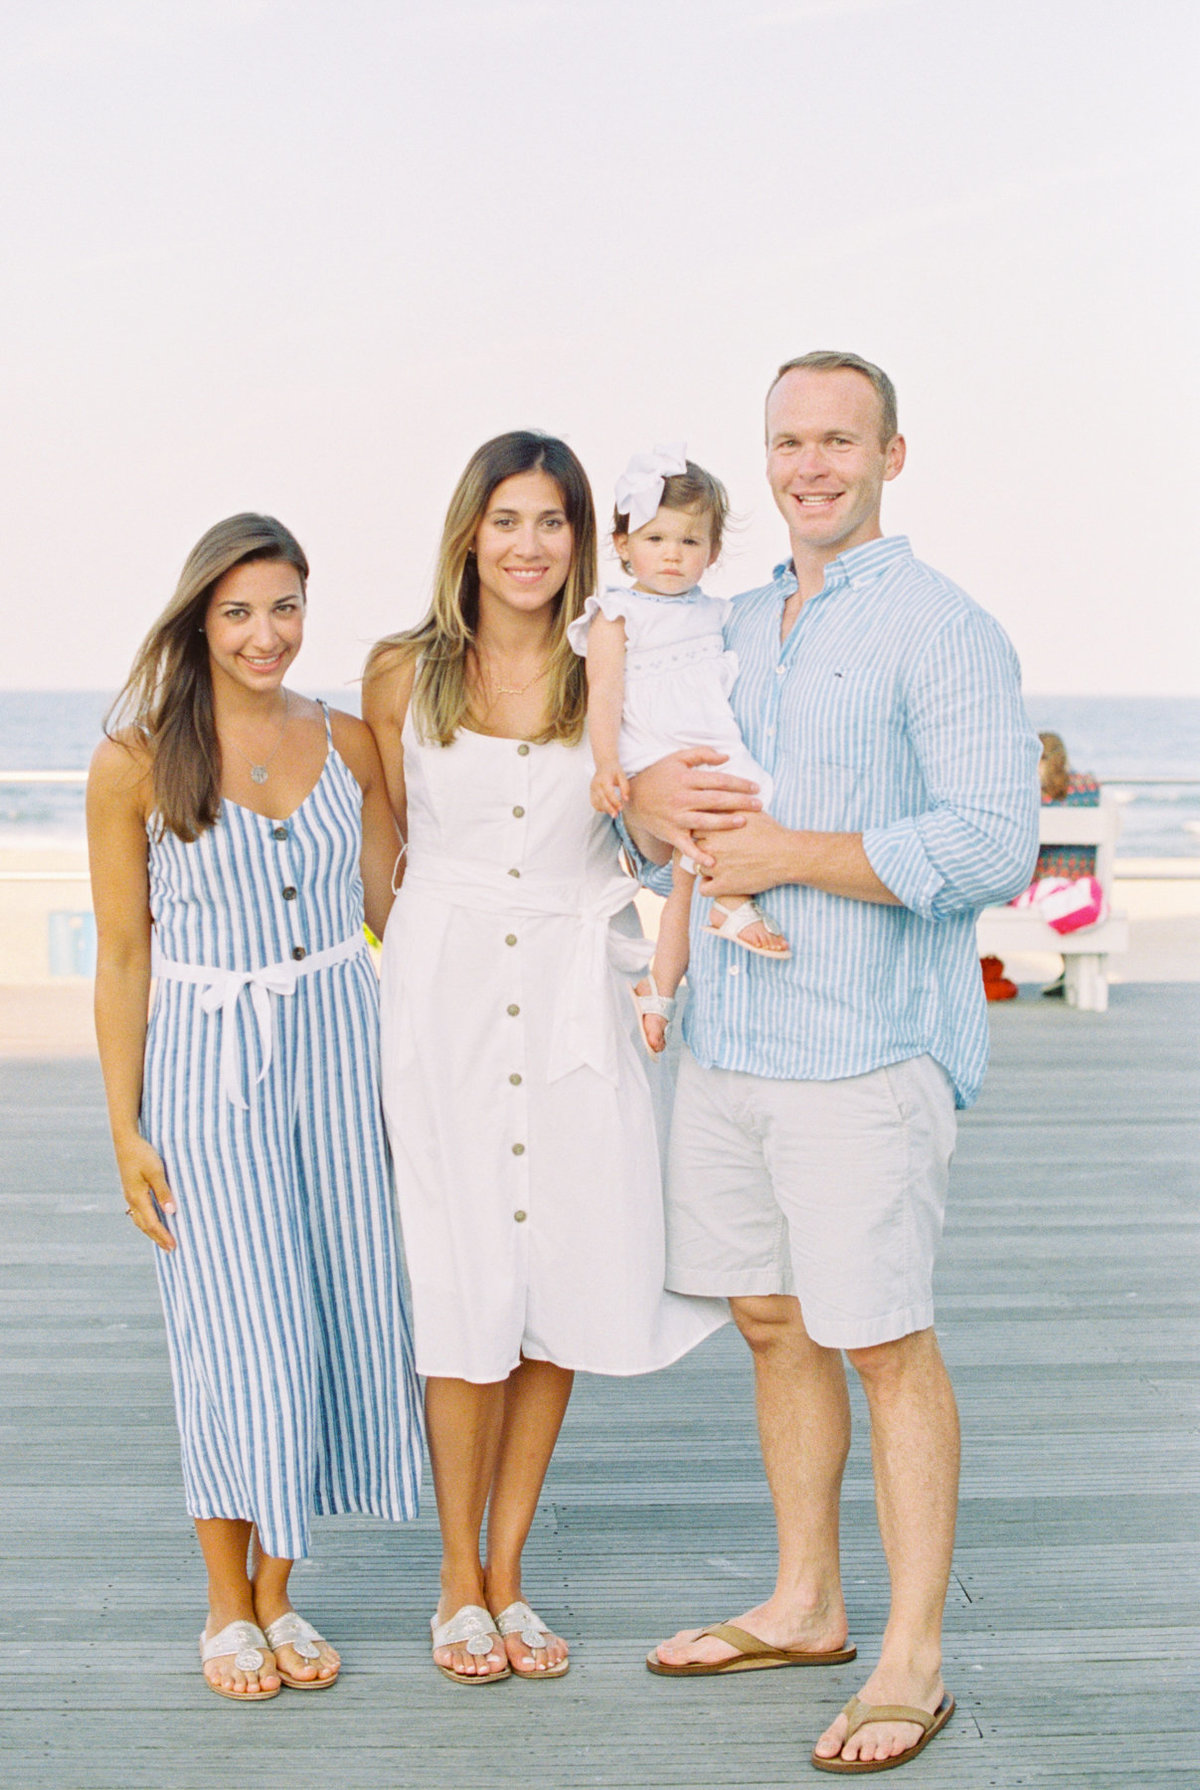 Michelle Behre Photography NJ Fine Art Photographer Seaside Family Lifestyle Family Portrait Session in Avon-by-the-Sea-115